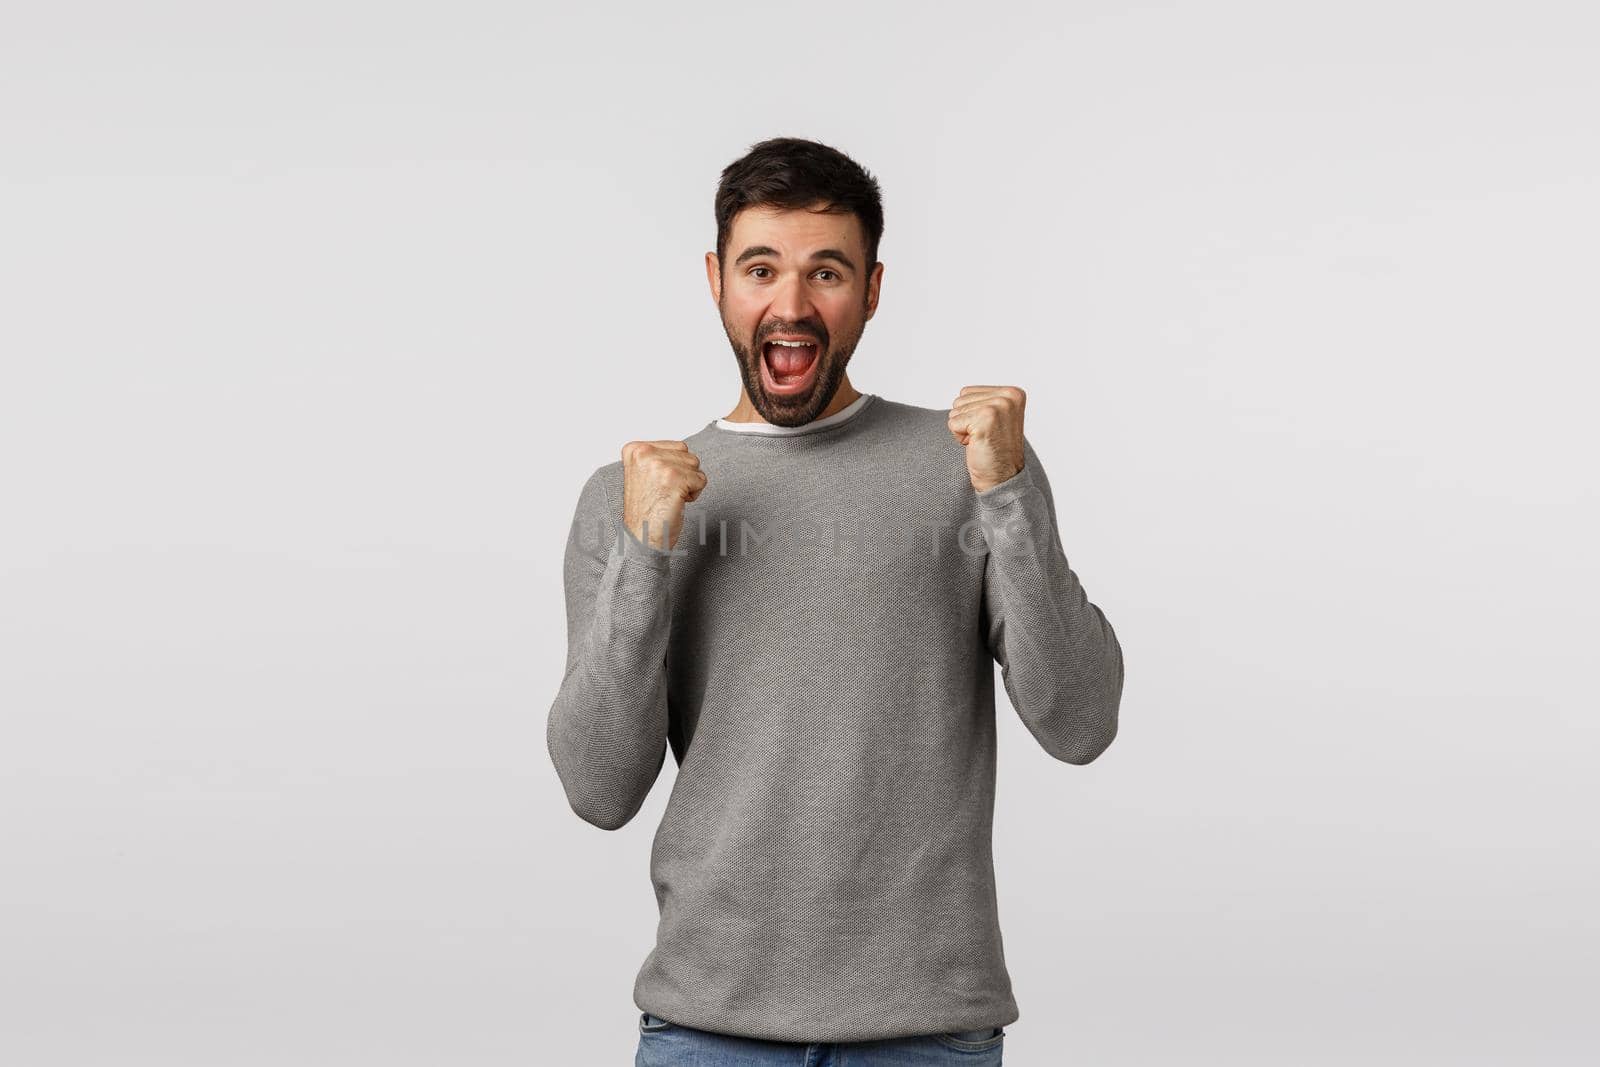 Celebration, luck and win concept. Cheerful optimistic caucasian guy in grey sweater celebrating good news, fist pump and joyfully smiling, congratulate friend, achieve goal, receive prize.